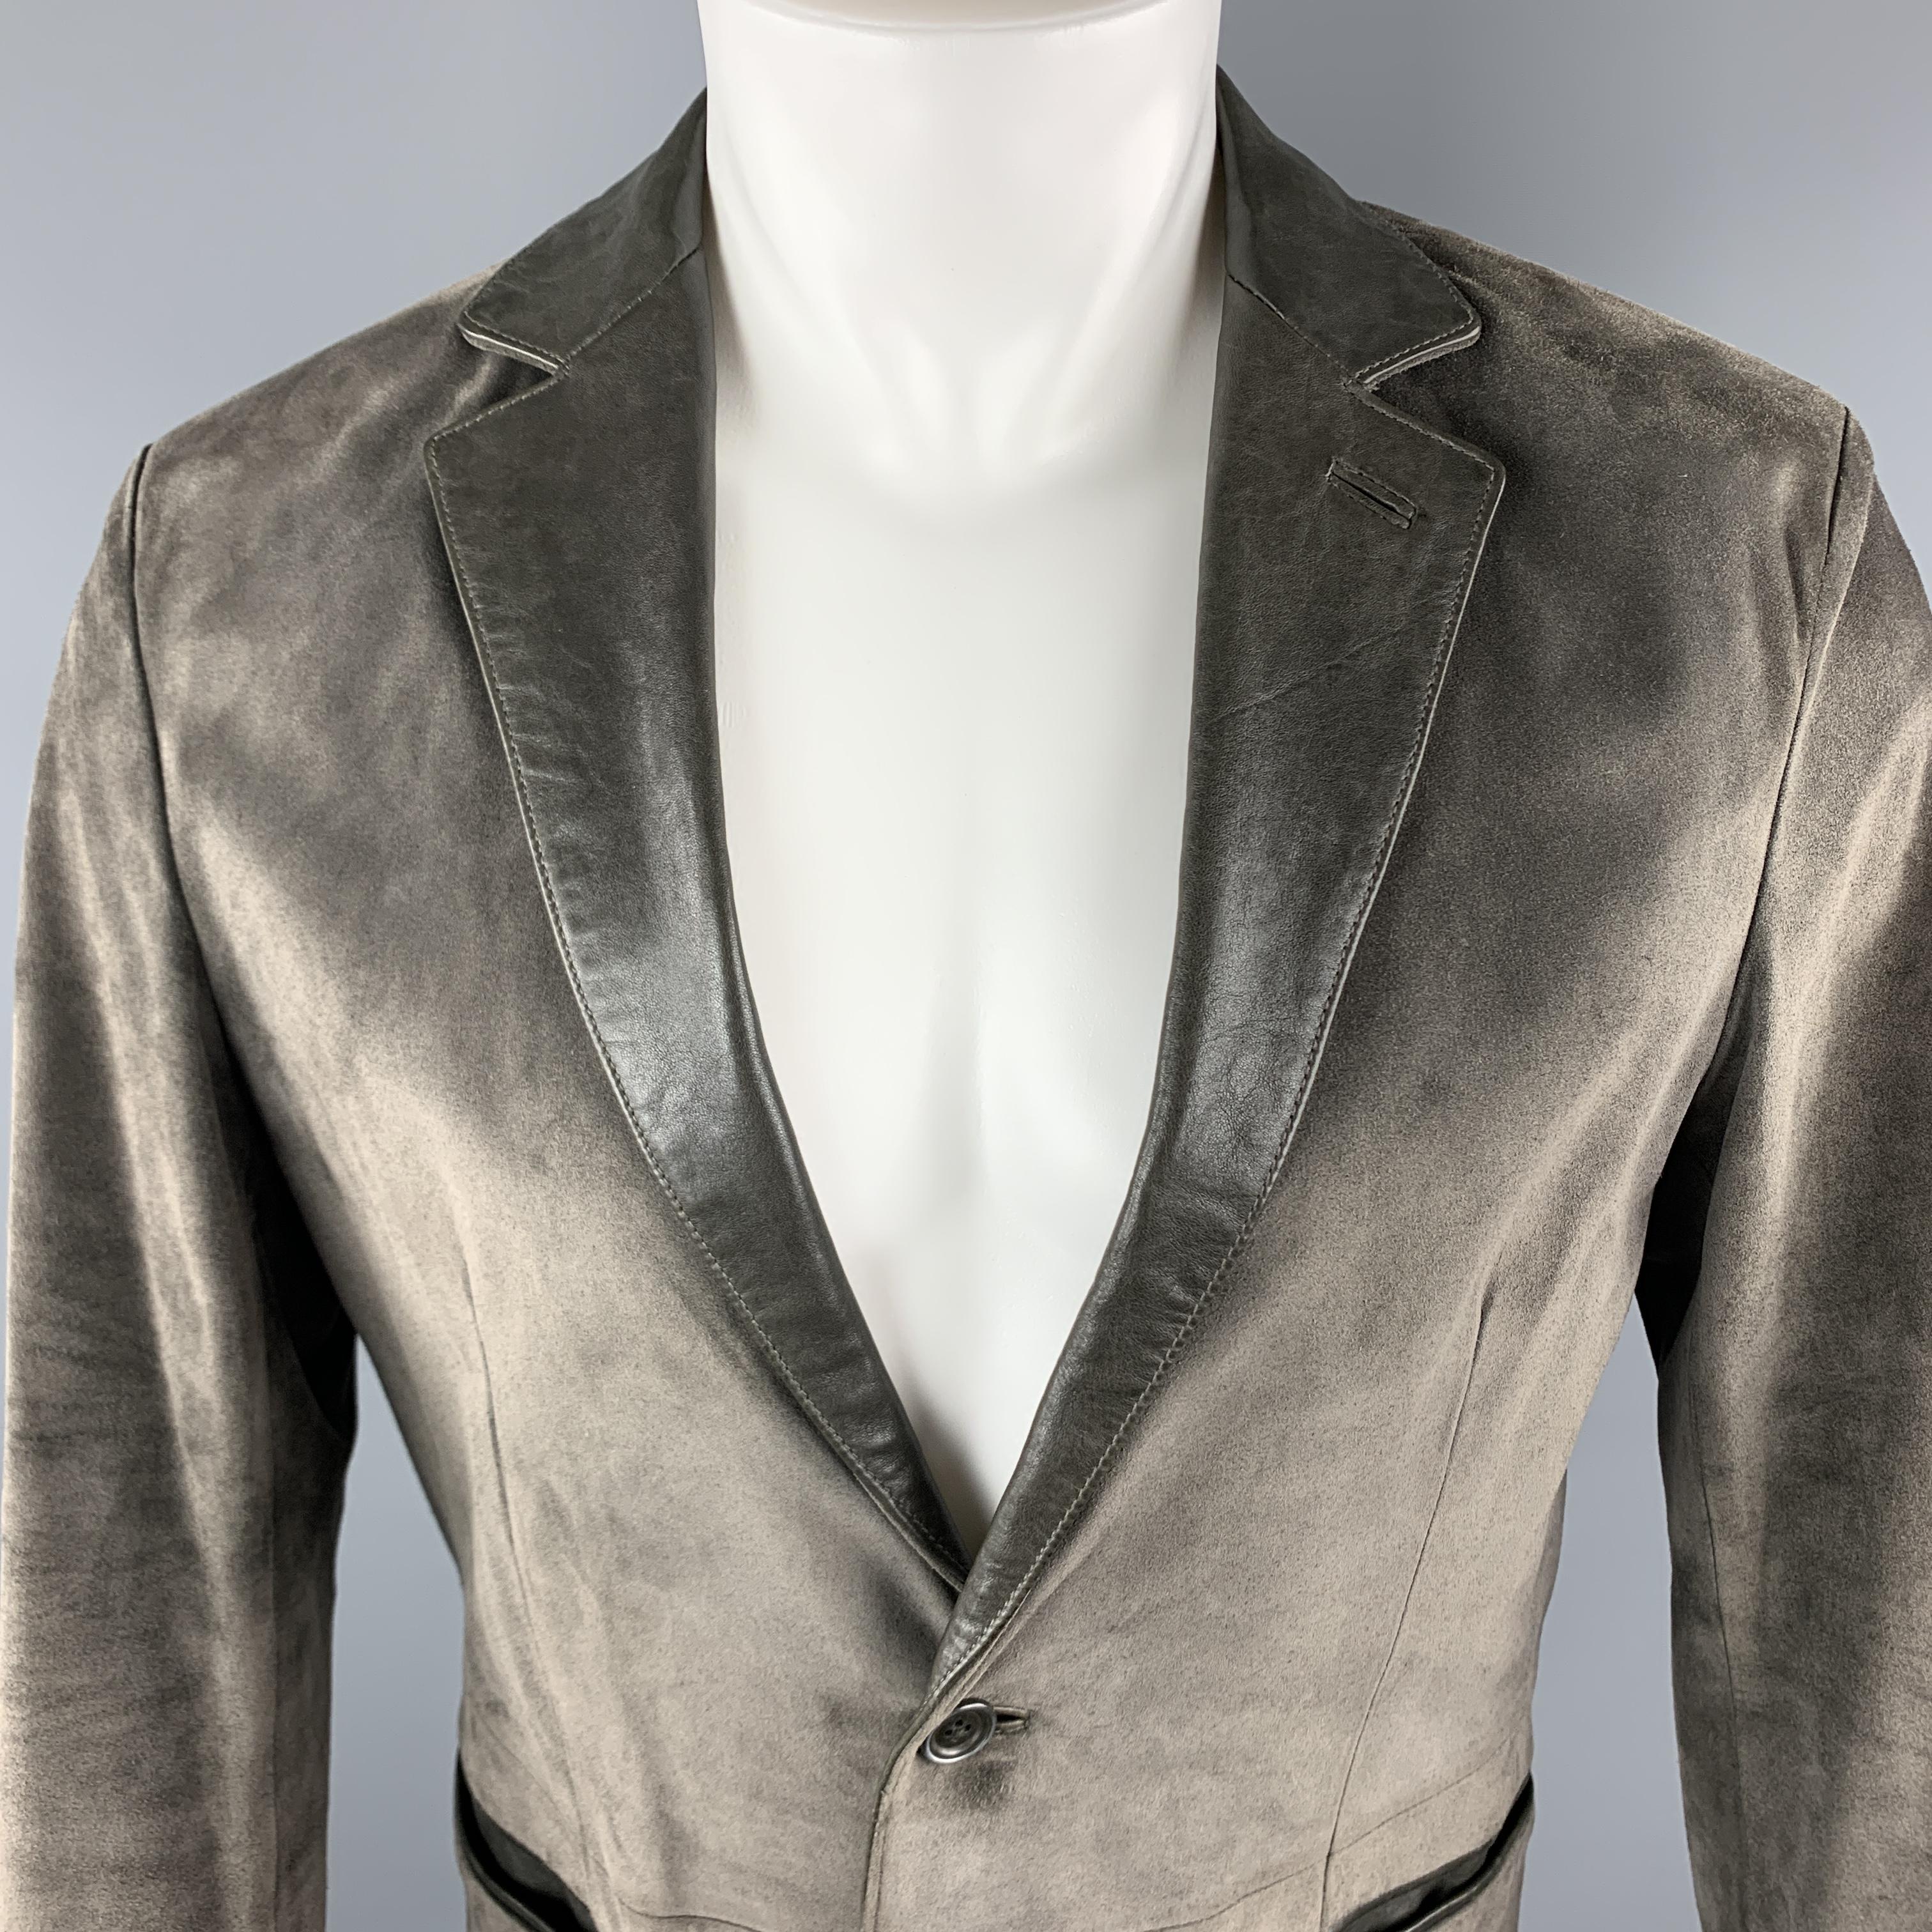 JOHN VARVATOS JACKET comes in a slate suede material, featuring a notch lapel, a leather trim, two buttons at closure, single breasted, slit pockets, functional buttons at cuffs, and a single vent at back. 

Excellent Pre-Owned Condition.
Marked: IT